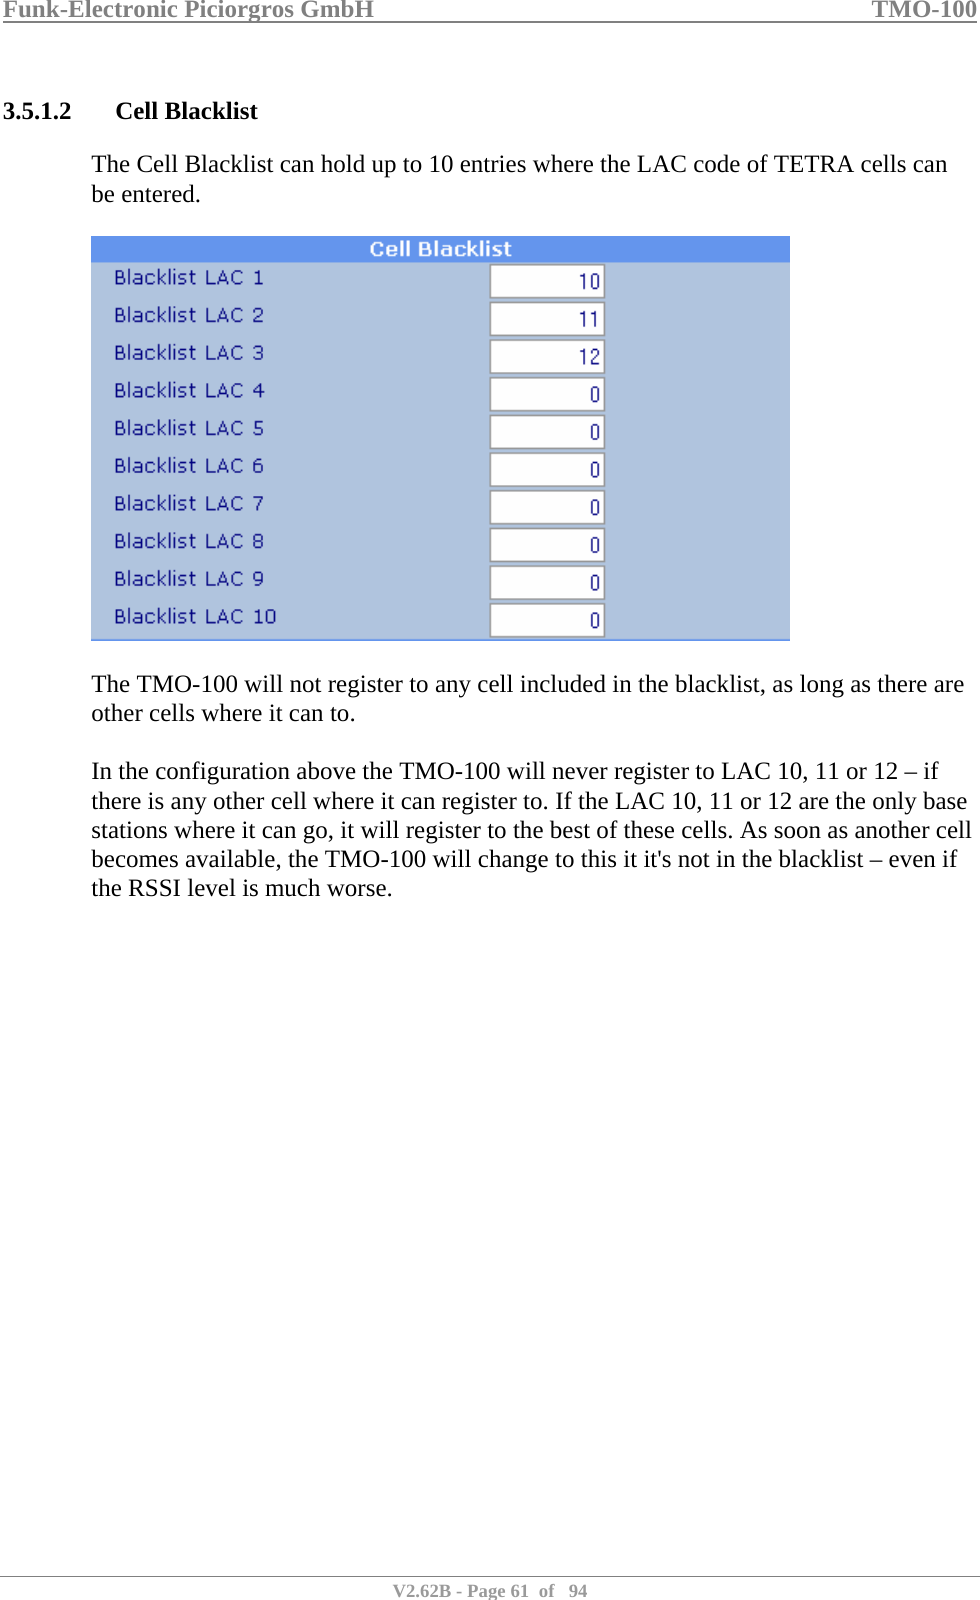 Funk-Electronic Piciorgros GmbH   TMO-100   V2.62B - Page 61  of   94   3.5.1.2 Cell Blacklist The Cell Blacklist can hold up to 10 entries where the LAC code of TETRA cells can be entered.    The TMO-100 will not register to any cell included in the blacklist, as long as there are other cells where it can to.  In the configuration above the TMO-100 will never register to LAC 10, 11 or 12 – if there is any other cell where it can register to. If the LAC 10, 11 or 12 are the only base stations where it can go, it will register to the best of these cells. As soon as another cell becomes available, the TMO-100 will change to this it it&apos;s not in the blacklist – even if the RSSI level is much worse.  